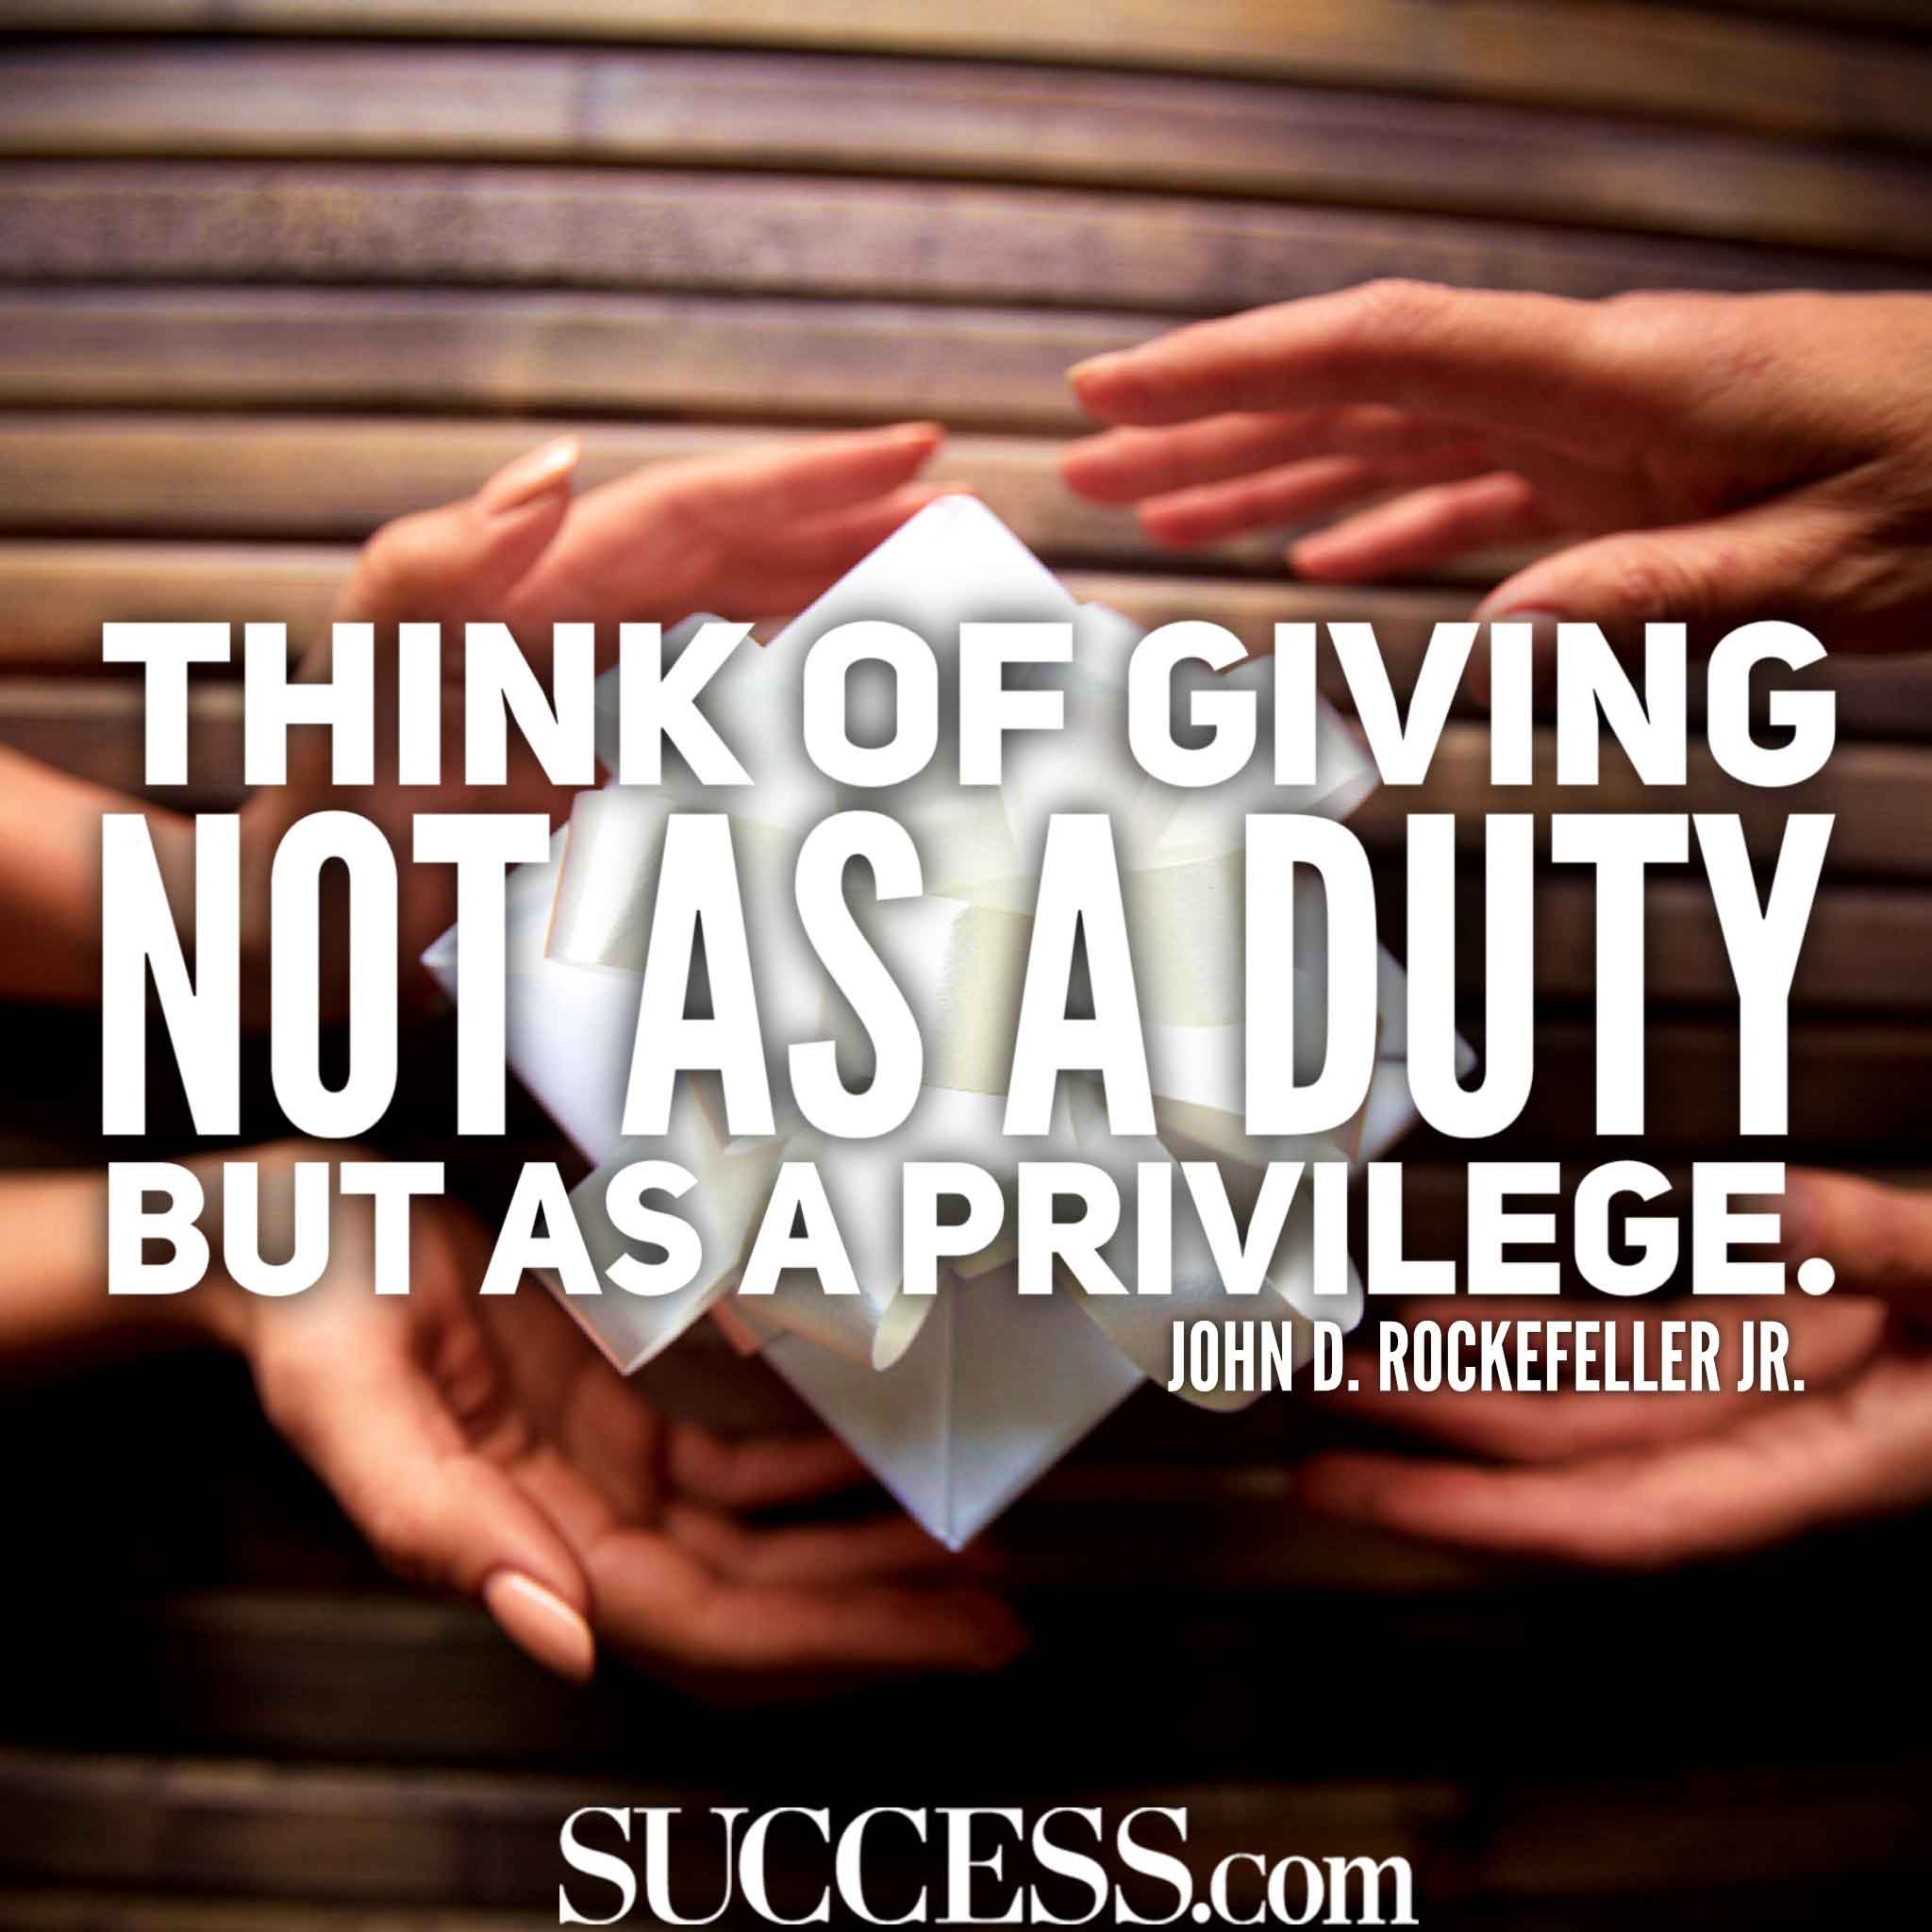 15 Inspiring Quotes About Giving | Success